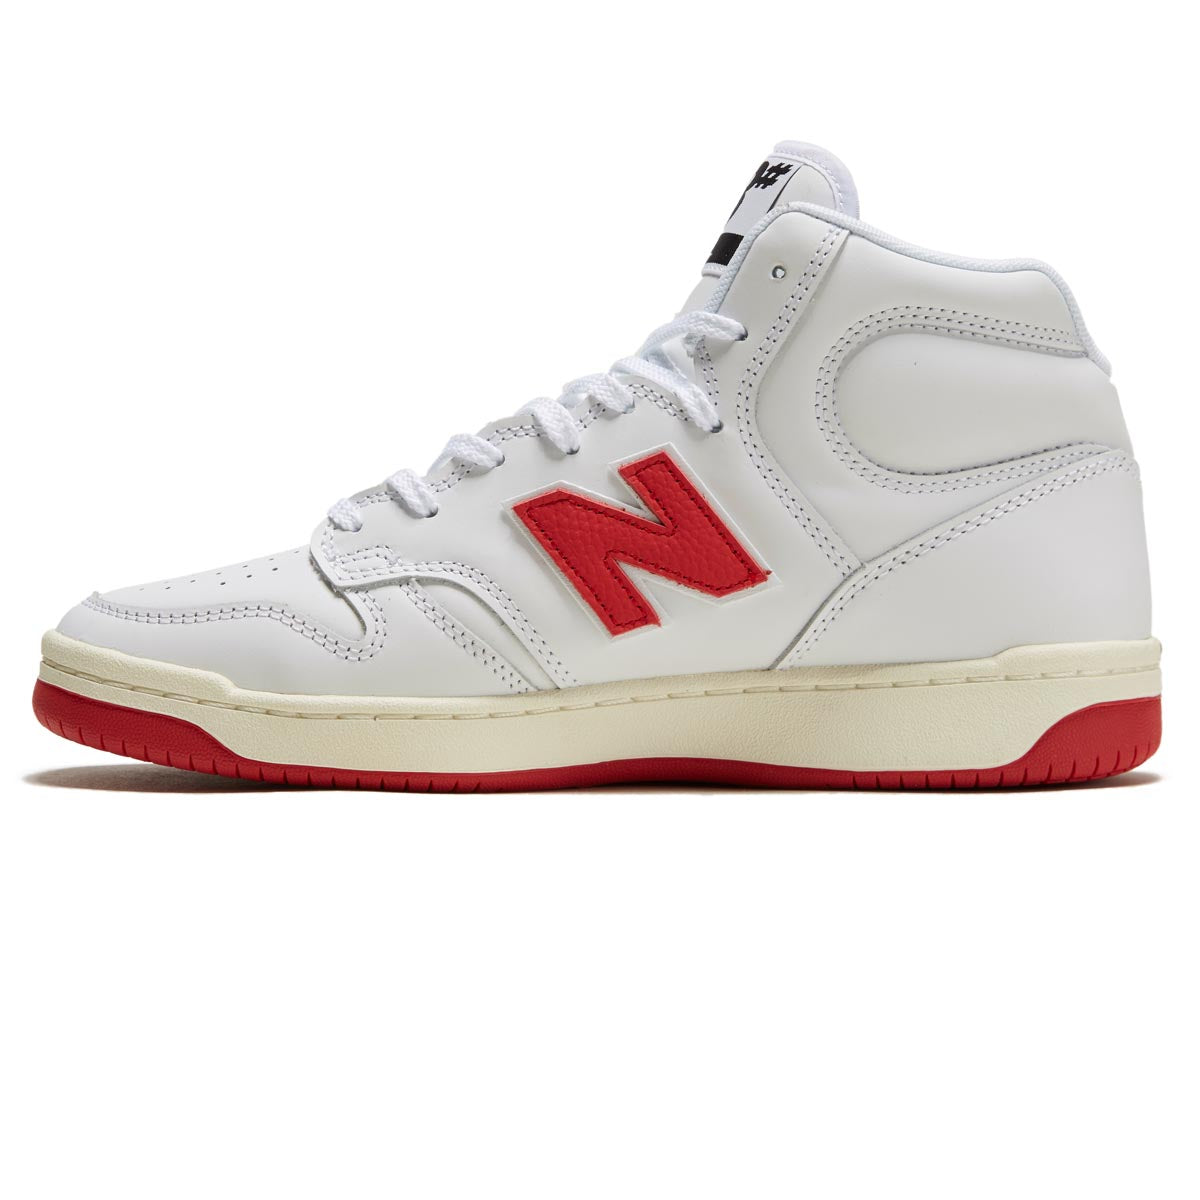 New Balance 480 High Shoes - White/Red image 2